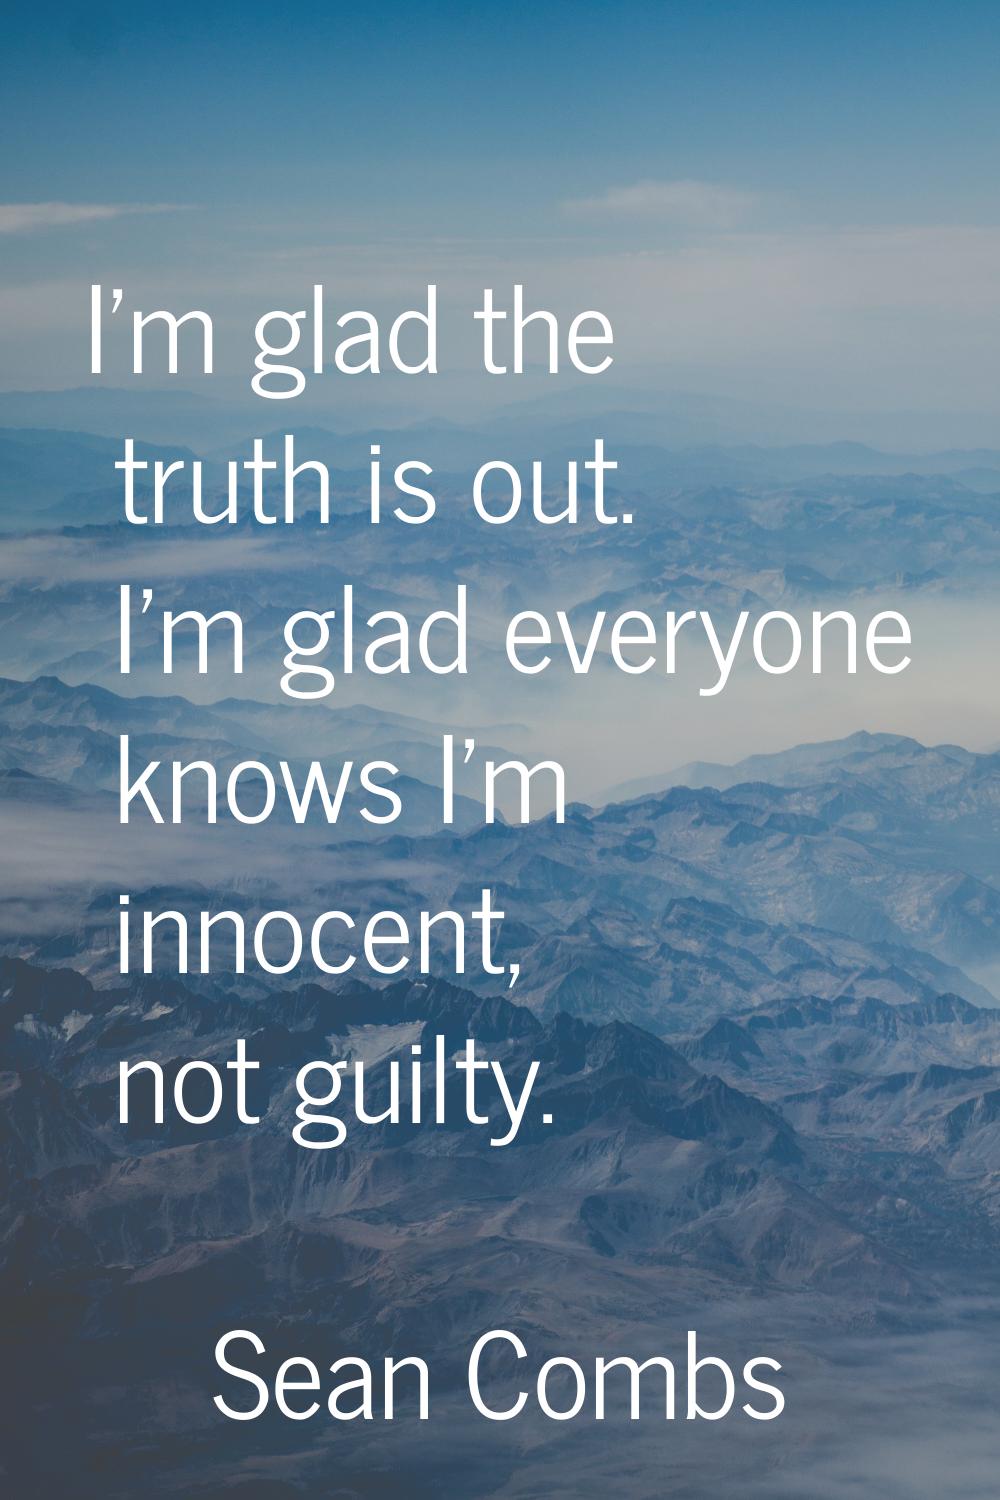 I'm glad the truth is out. I'm glad everyone knows I'm innocent, not guilty.